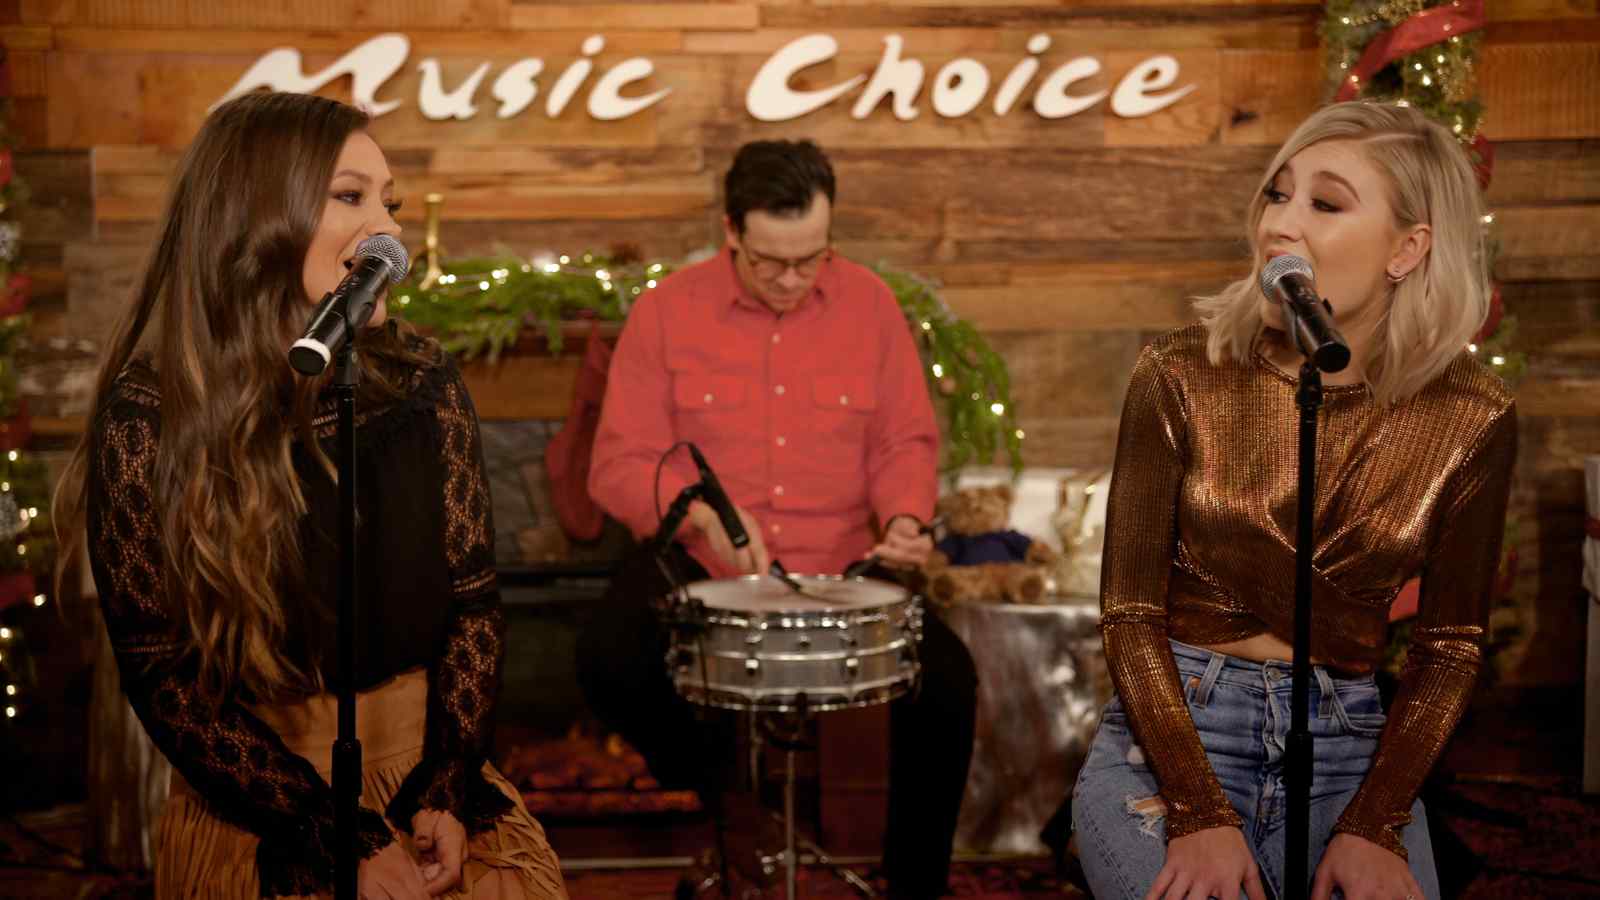 Check out a never-before-seen performance of "Have Yourself A Merry Little Christmas" from our Music Choice Sessions